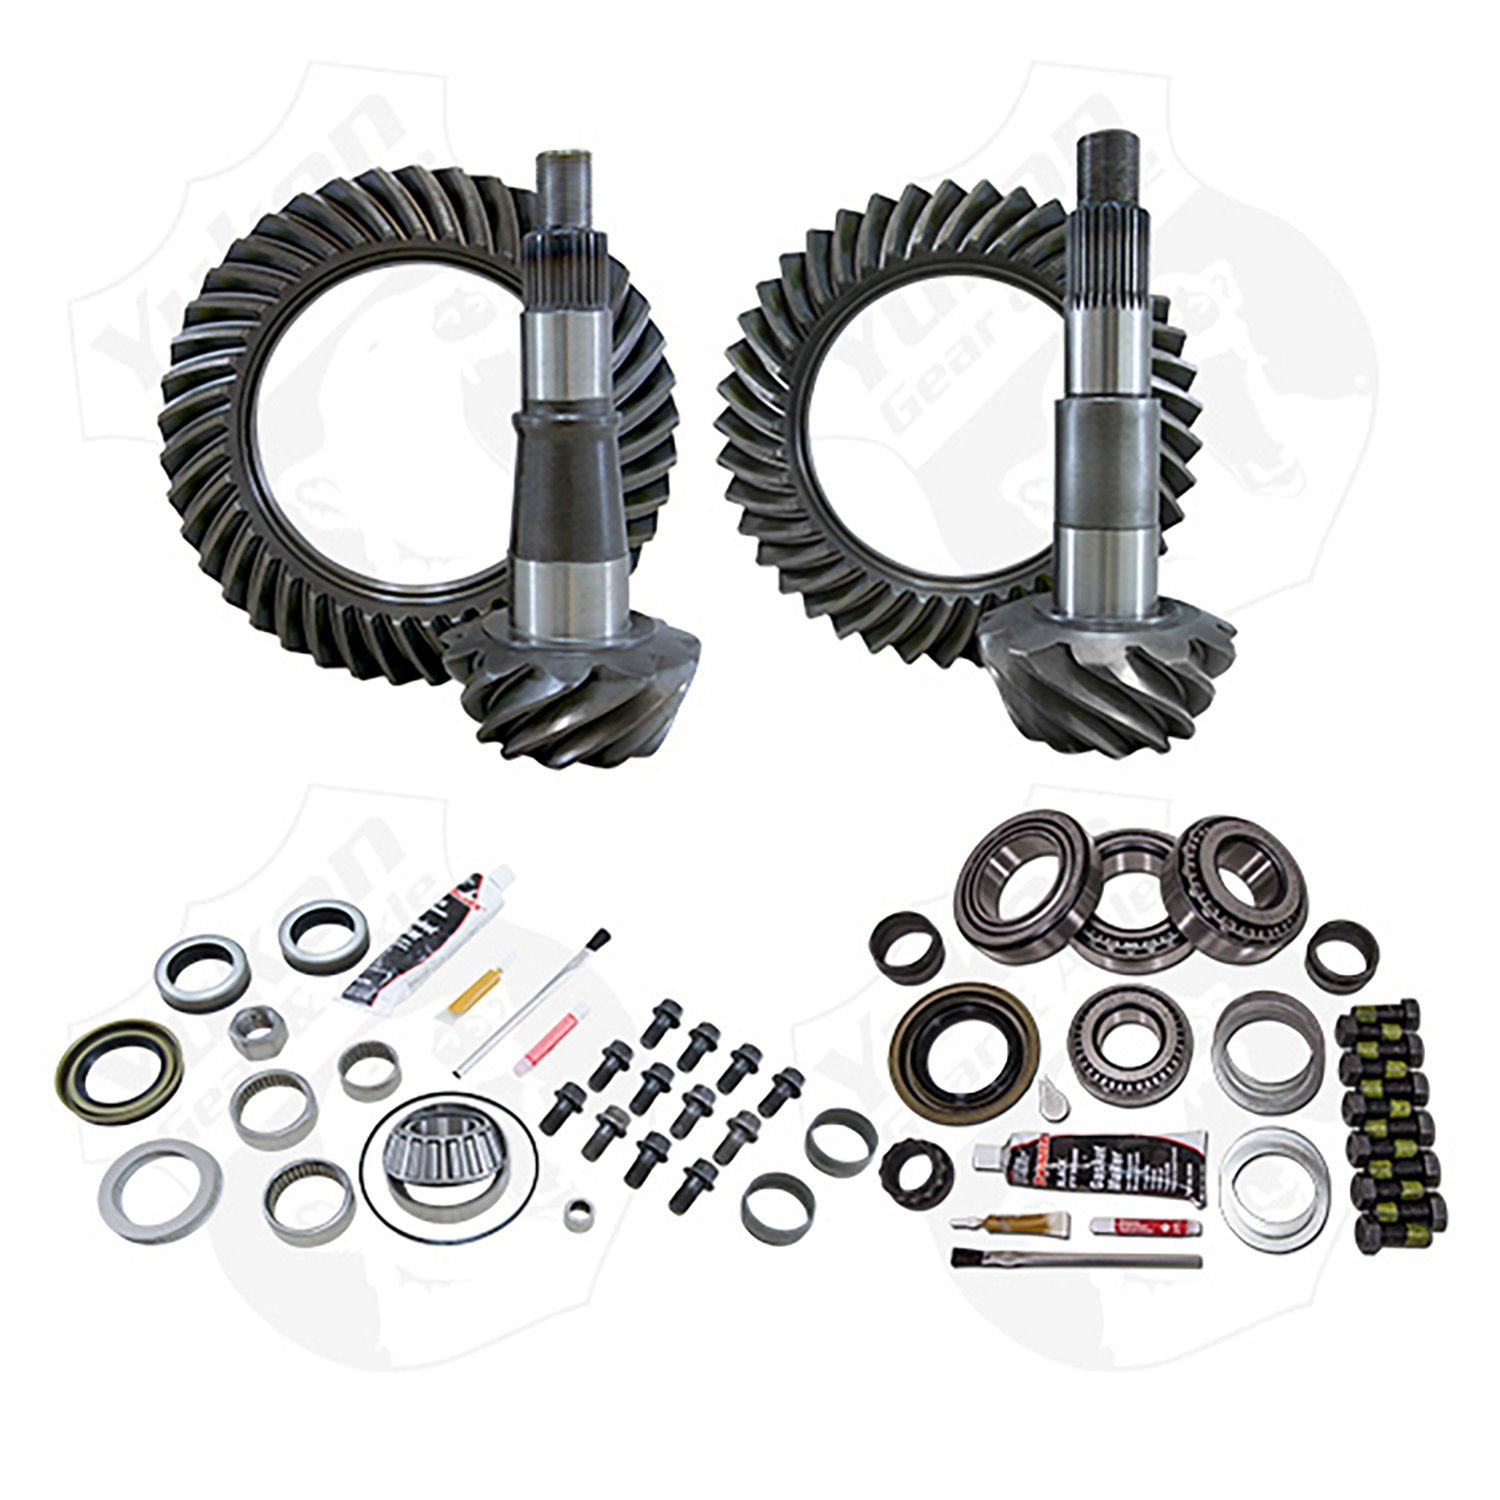 Gear & Install Kit Package For 2003-2011 Ram 2500 And 3500, 4.88 Ratio